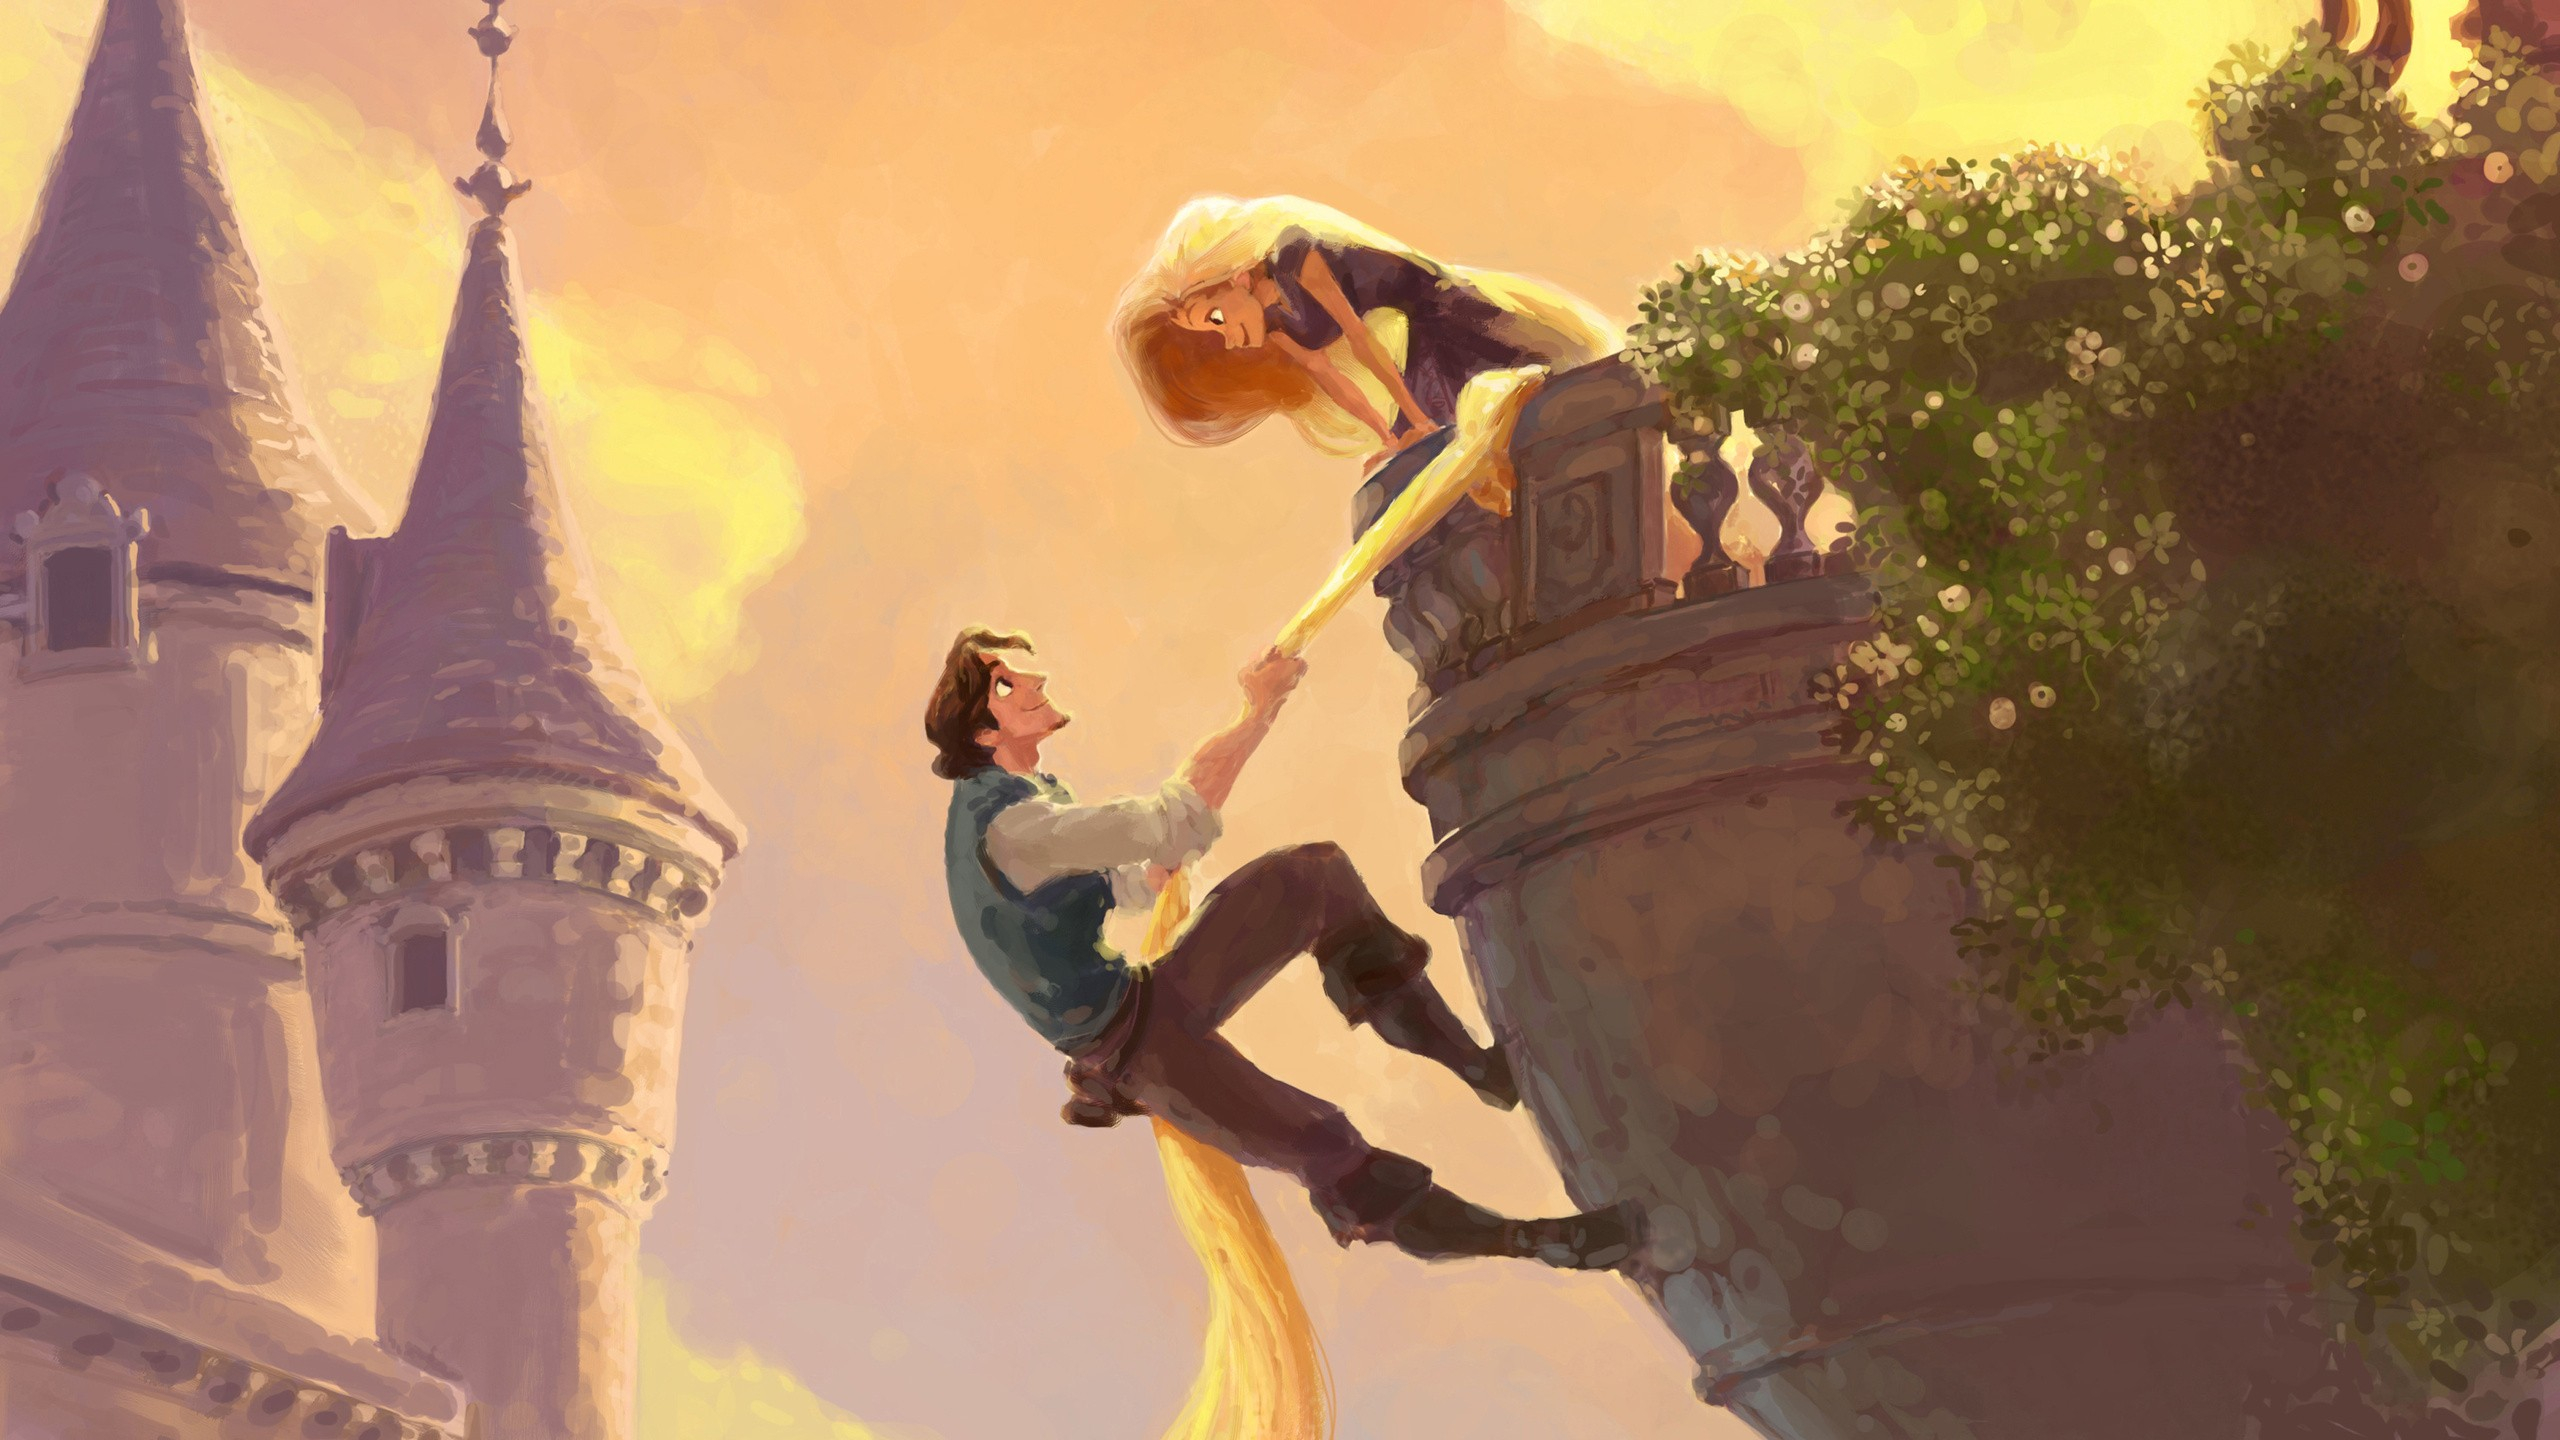 2560x1440 80+ Tangled HD Wallpapers, Achtergronde